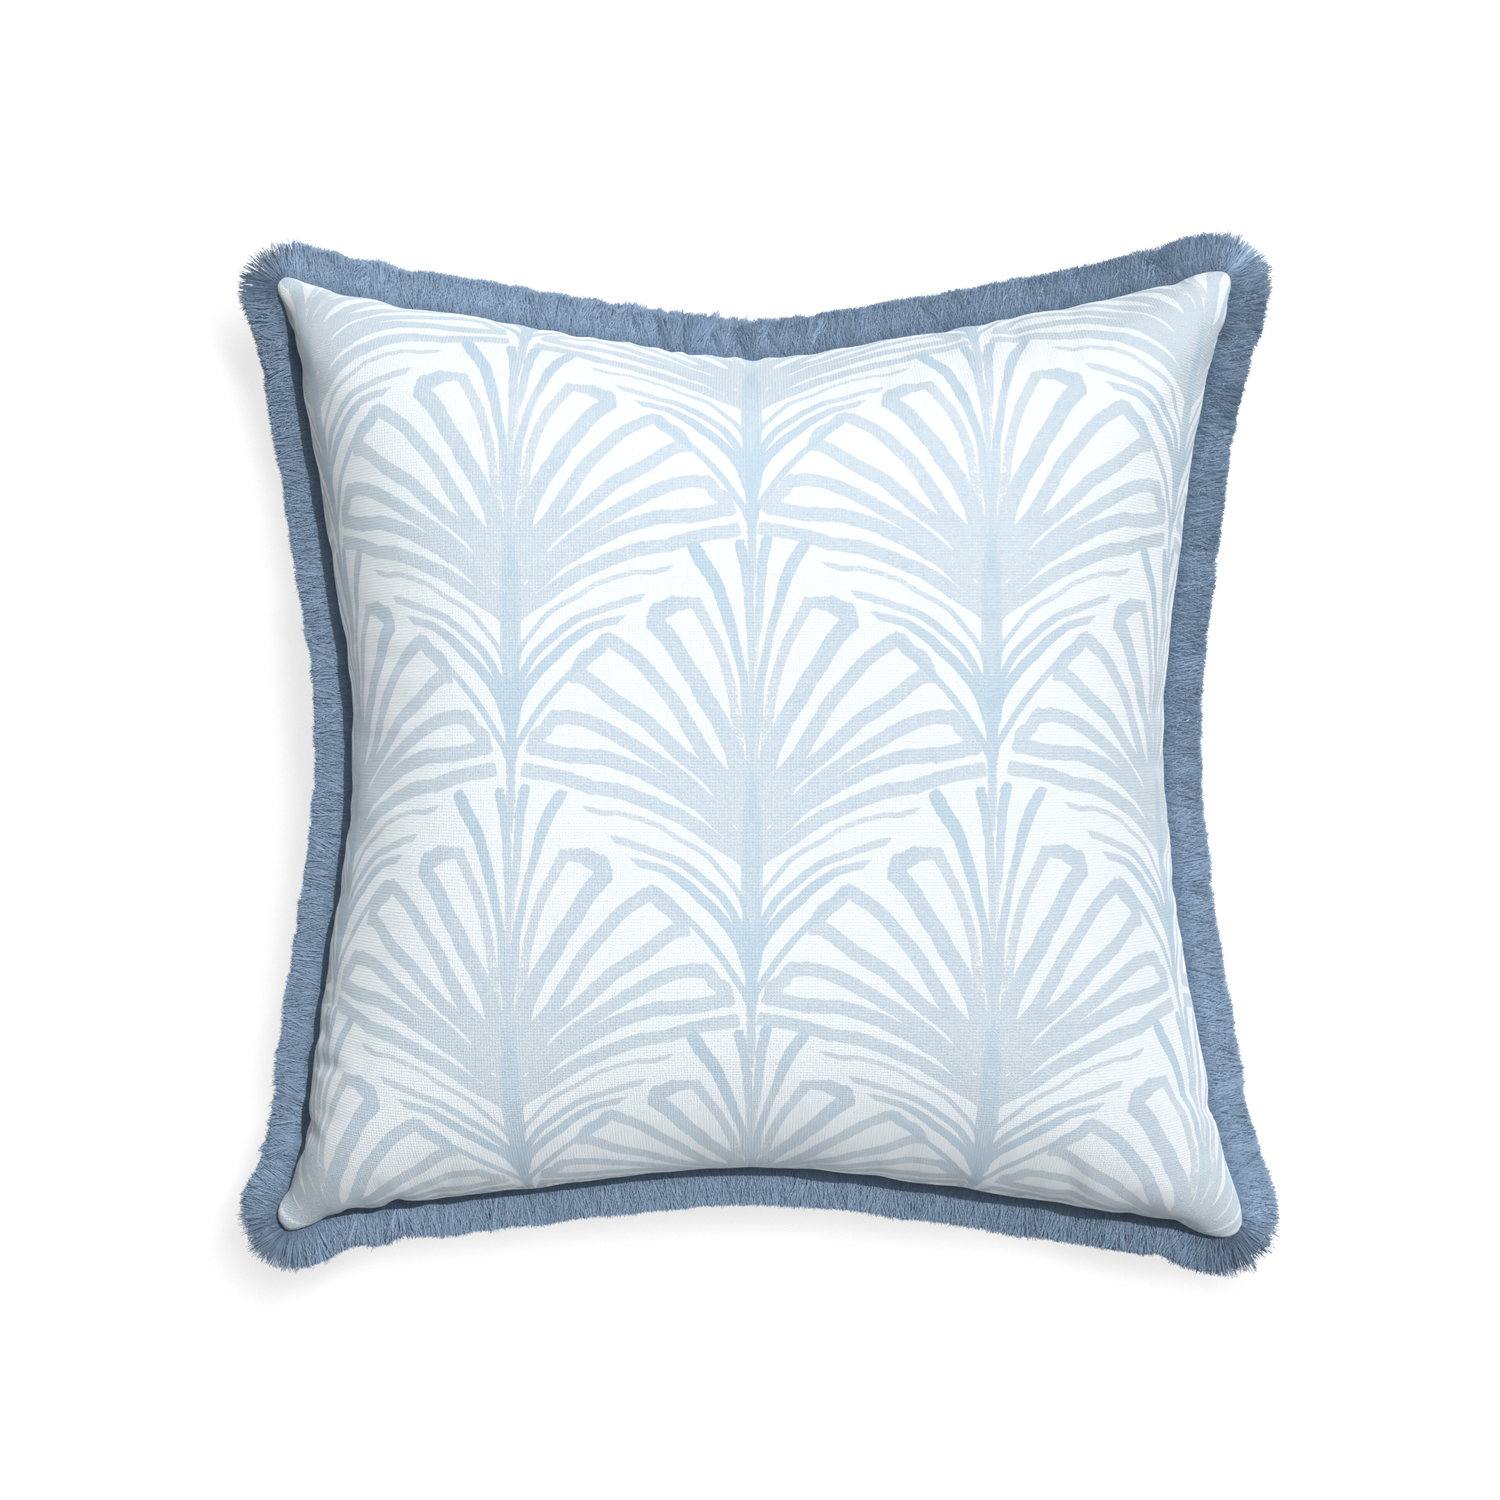 22-square suzy sky custom pillow with sky fringe on white background